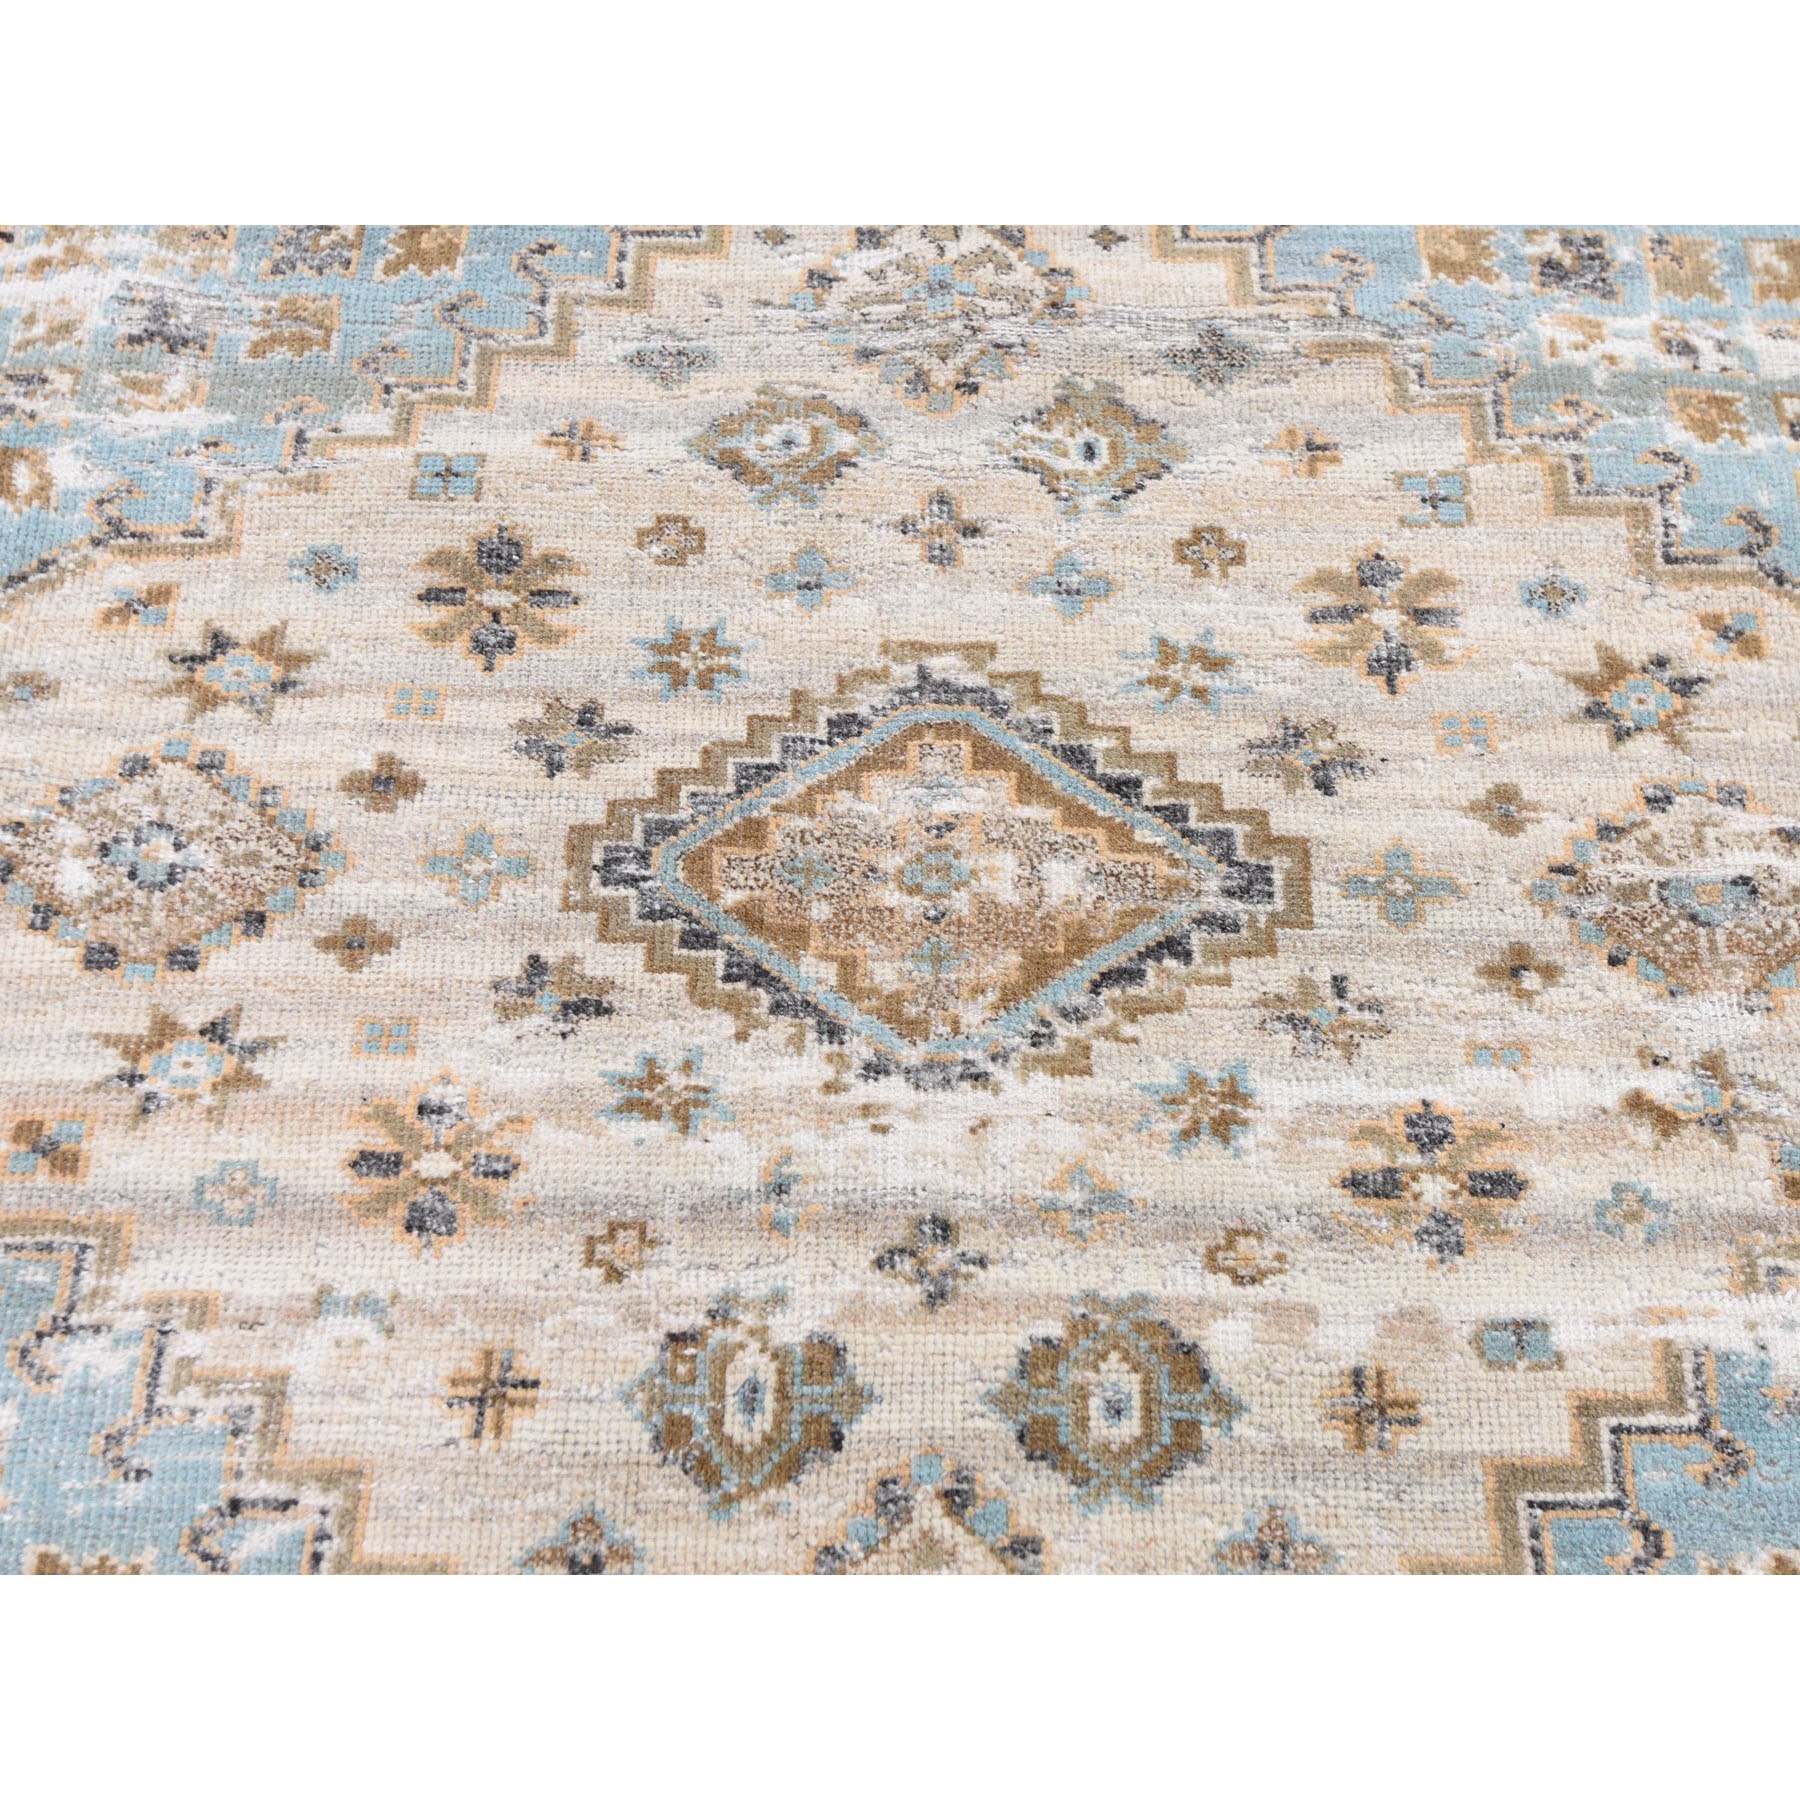 8-3 x10-4  Gray Serrated Vintage And Erased Shiraz Design Hand Knotted Oriental Rug 